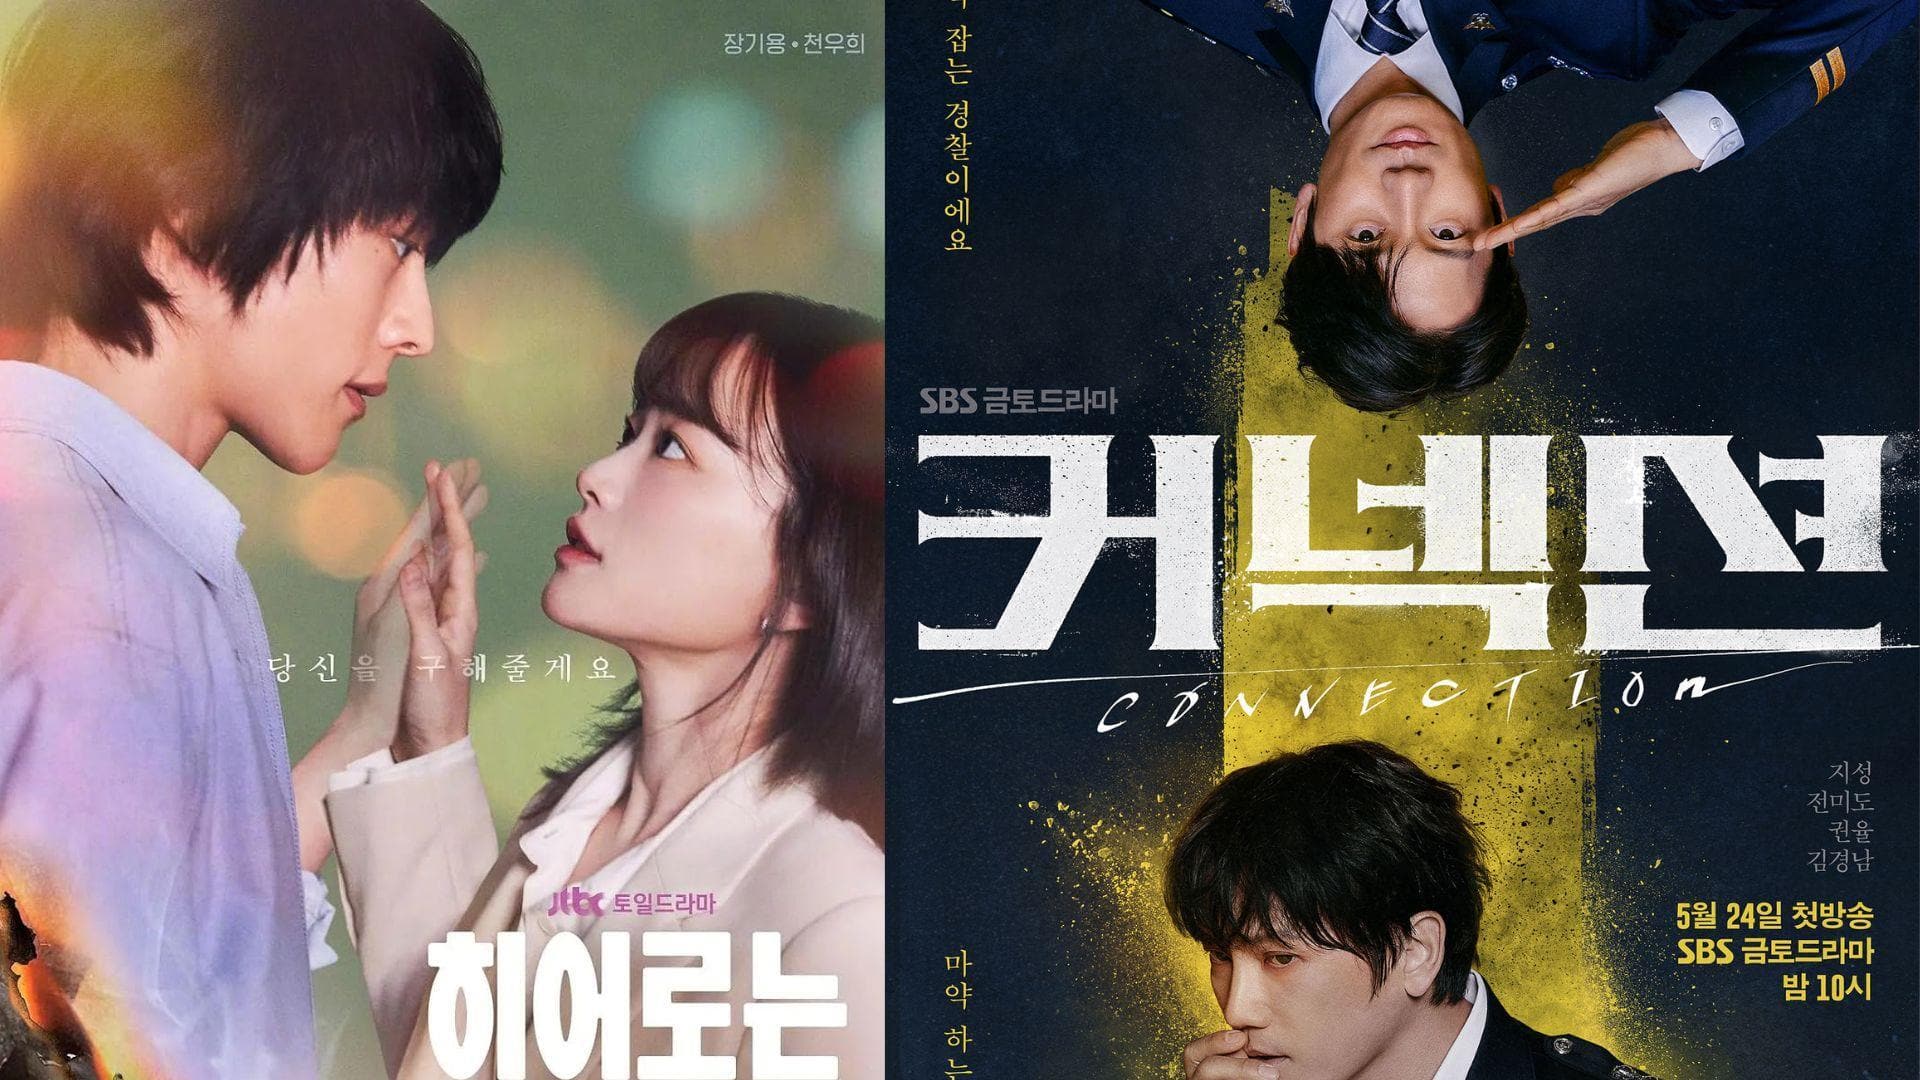 K-drama: Crime thriller 'Connection' outperforms Netflix's 'The Atypical Family'